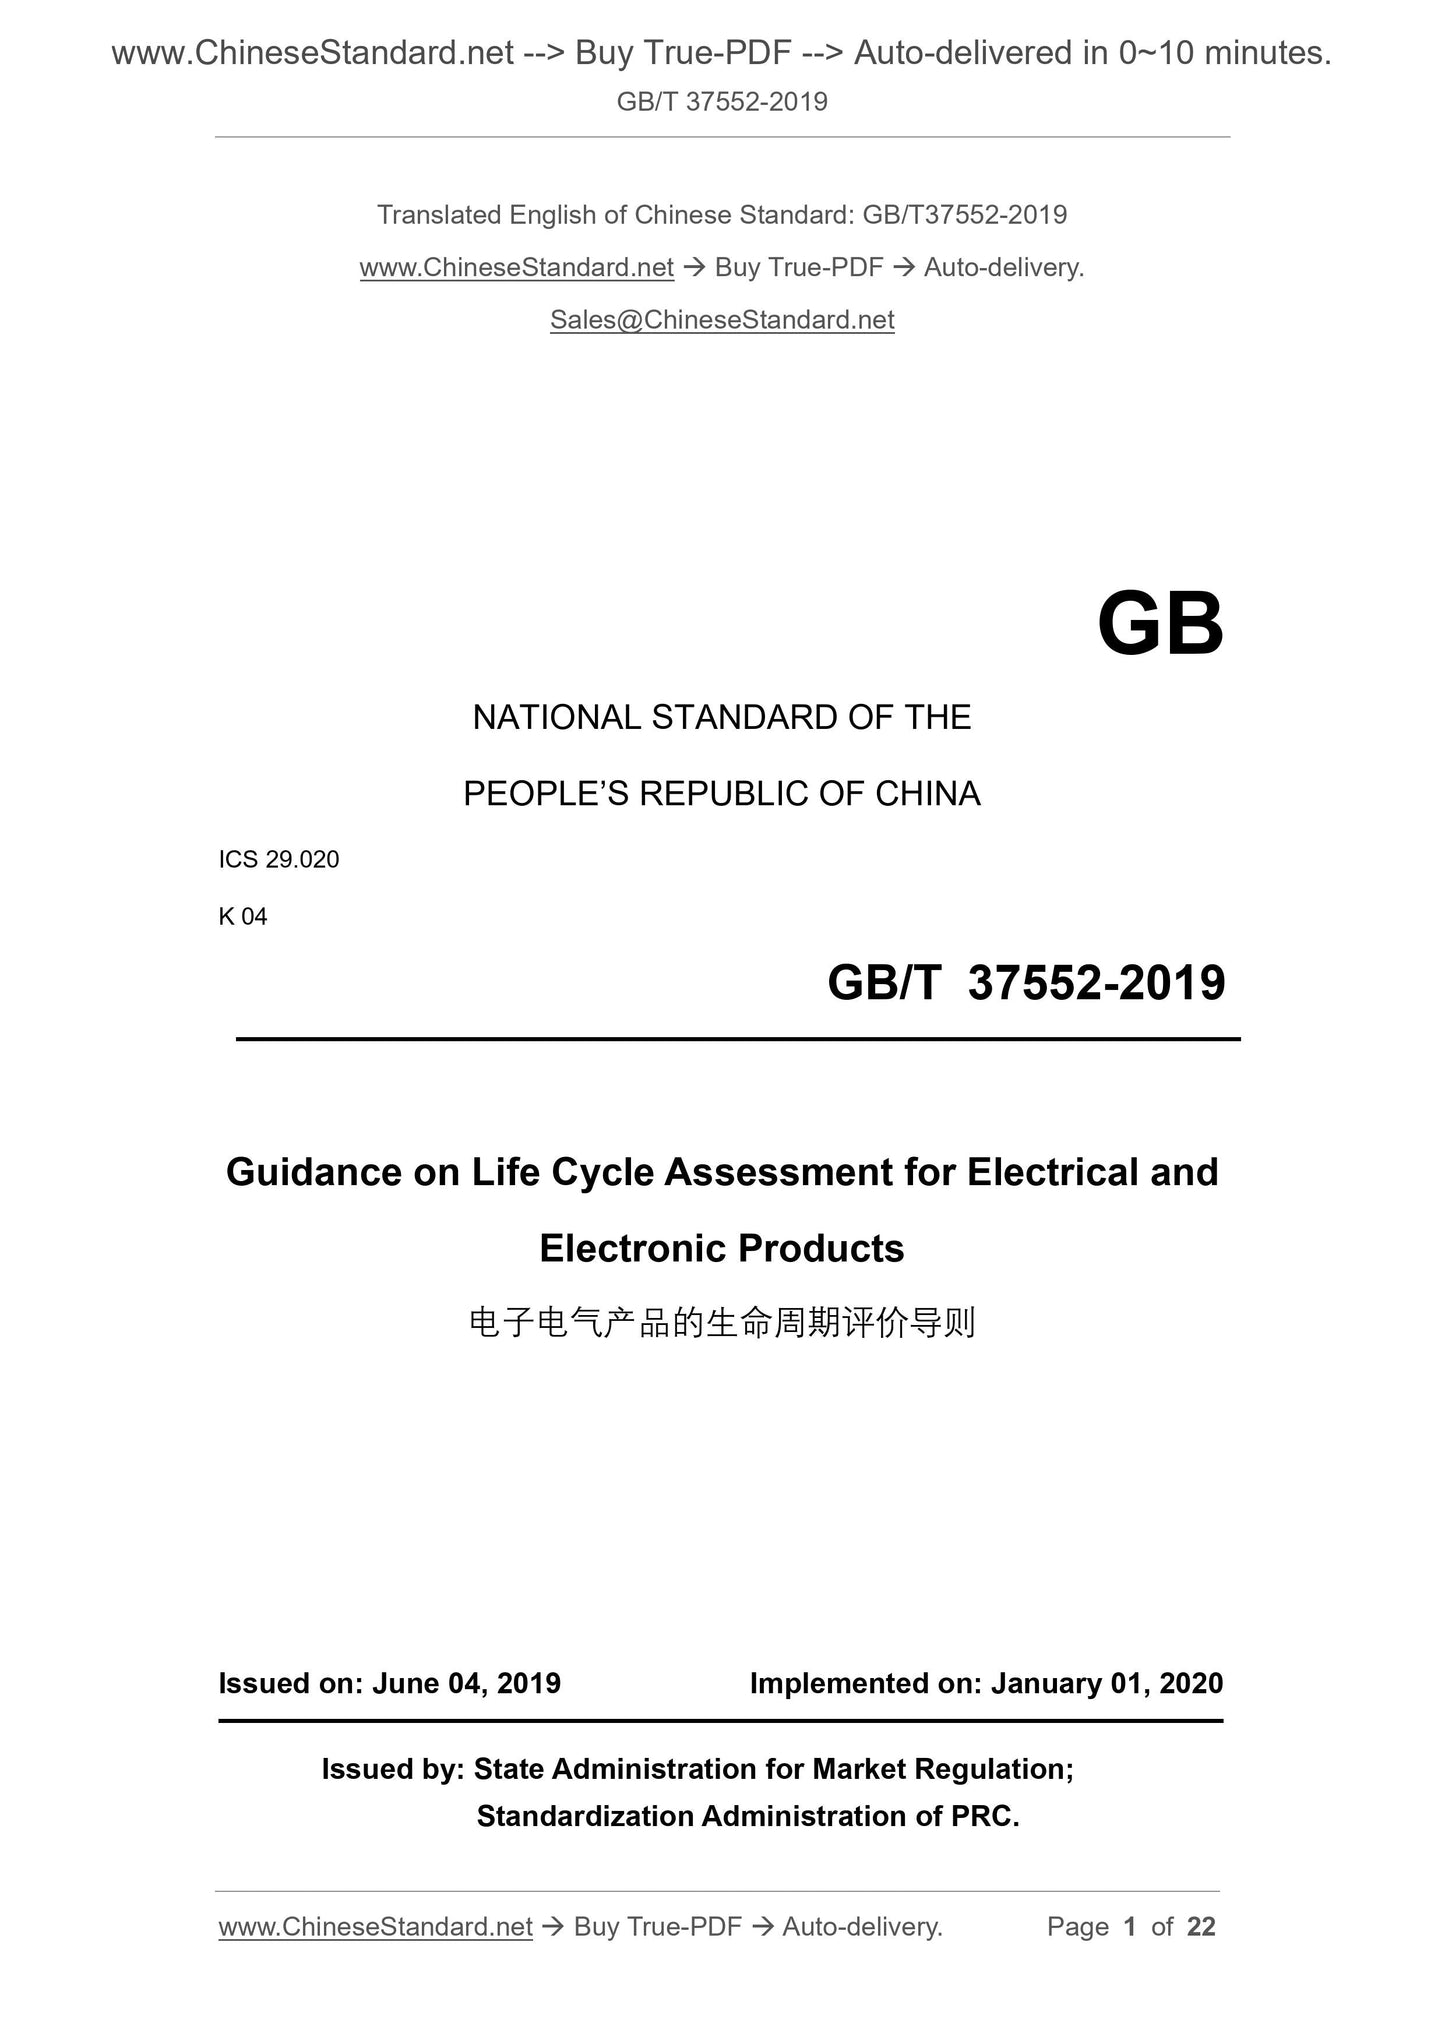 GB/T 37552-2019 Page 1